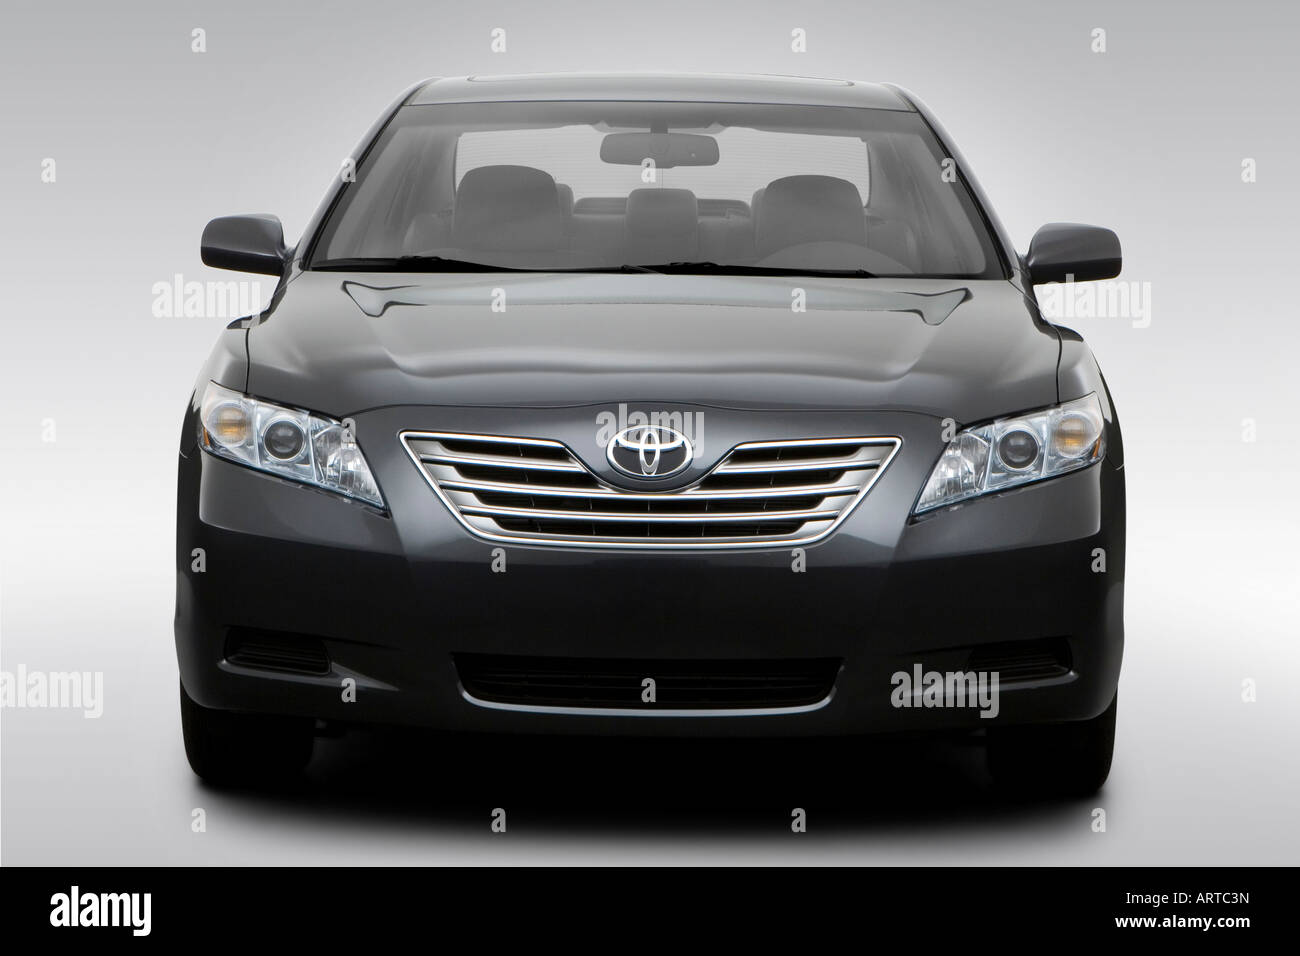 2008 Toyota Camry Hybrid in Gray - Low/Wide Front Stock Photo